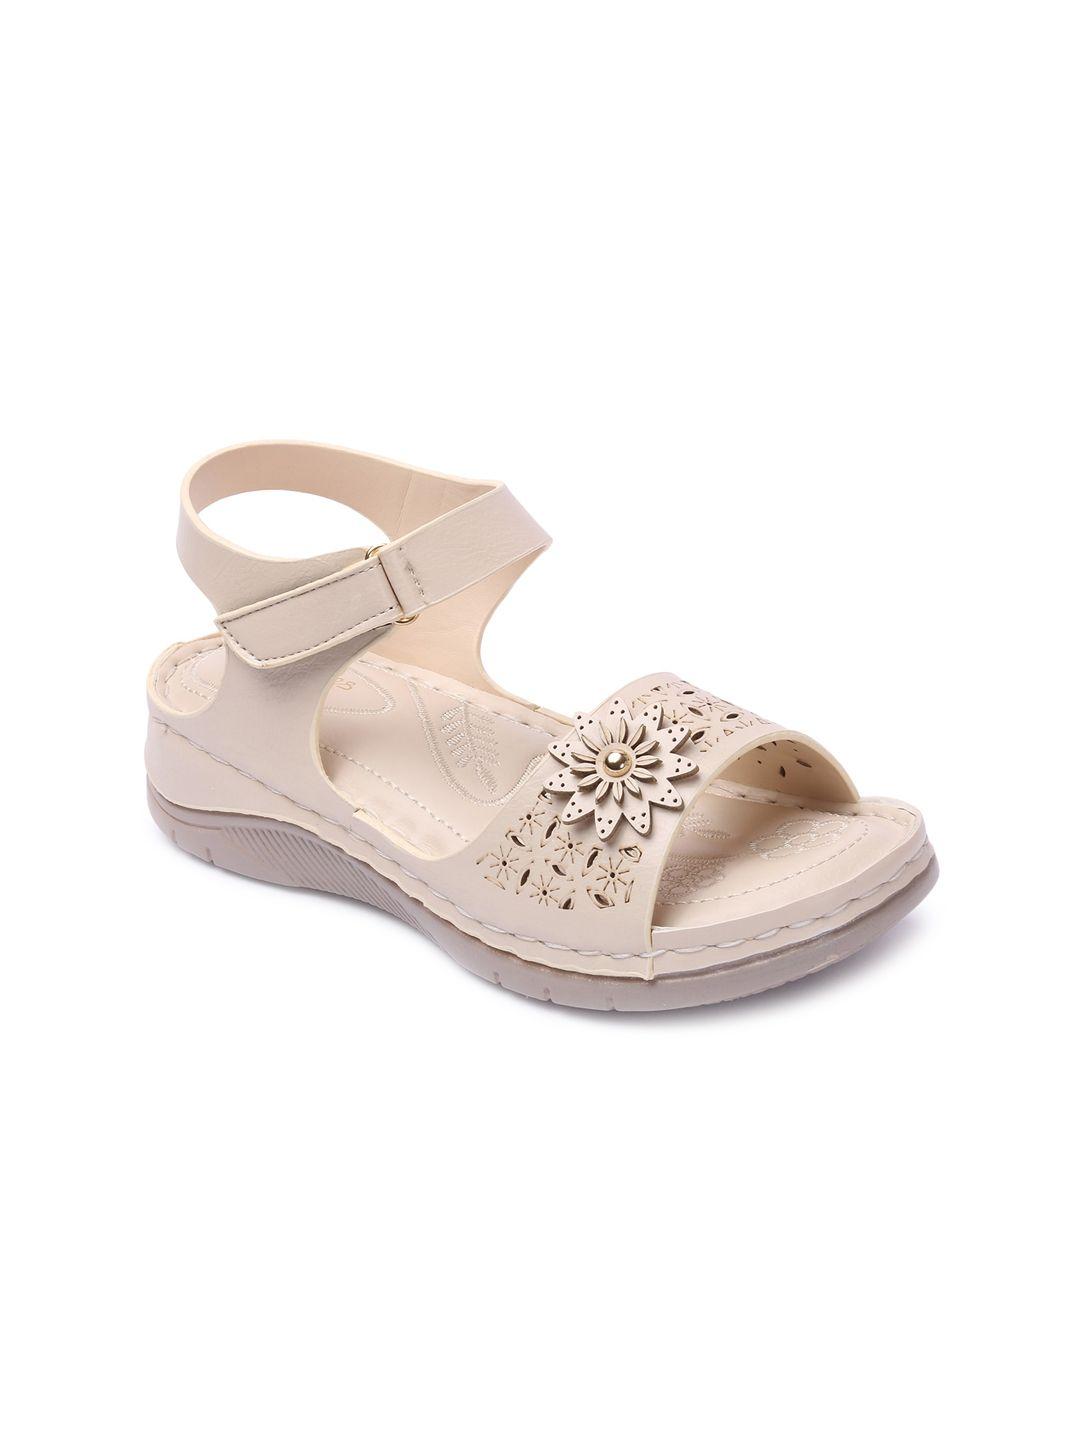 picktoes cream-coloured wedge sandals with buckles